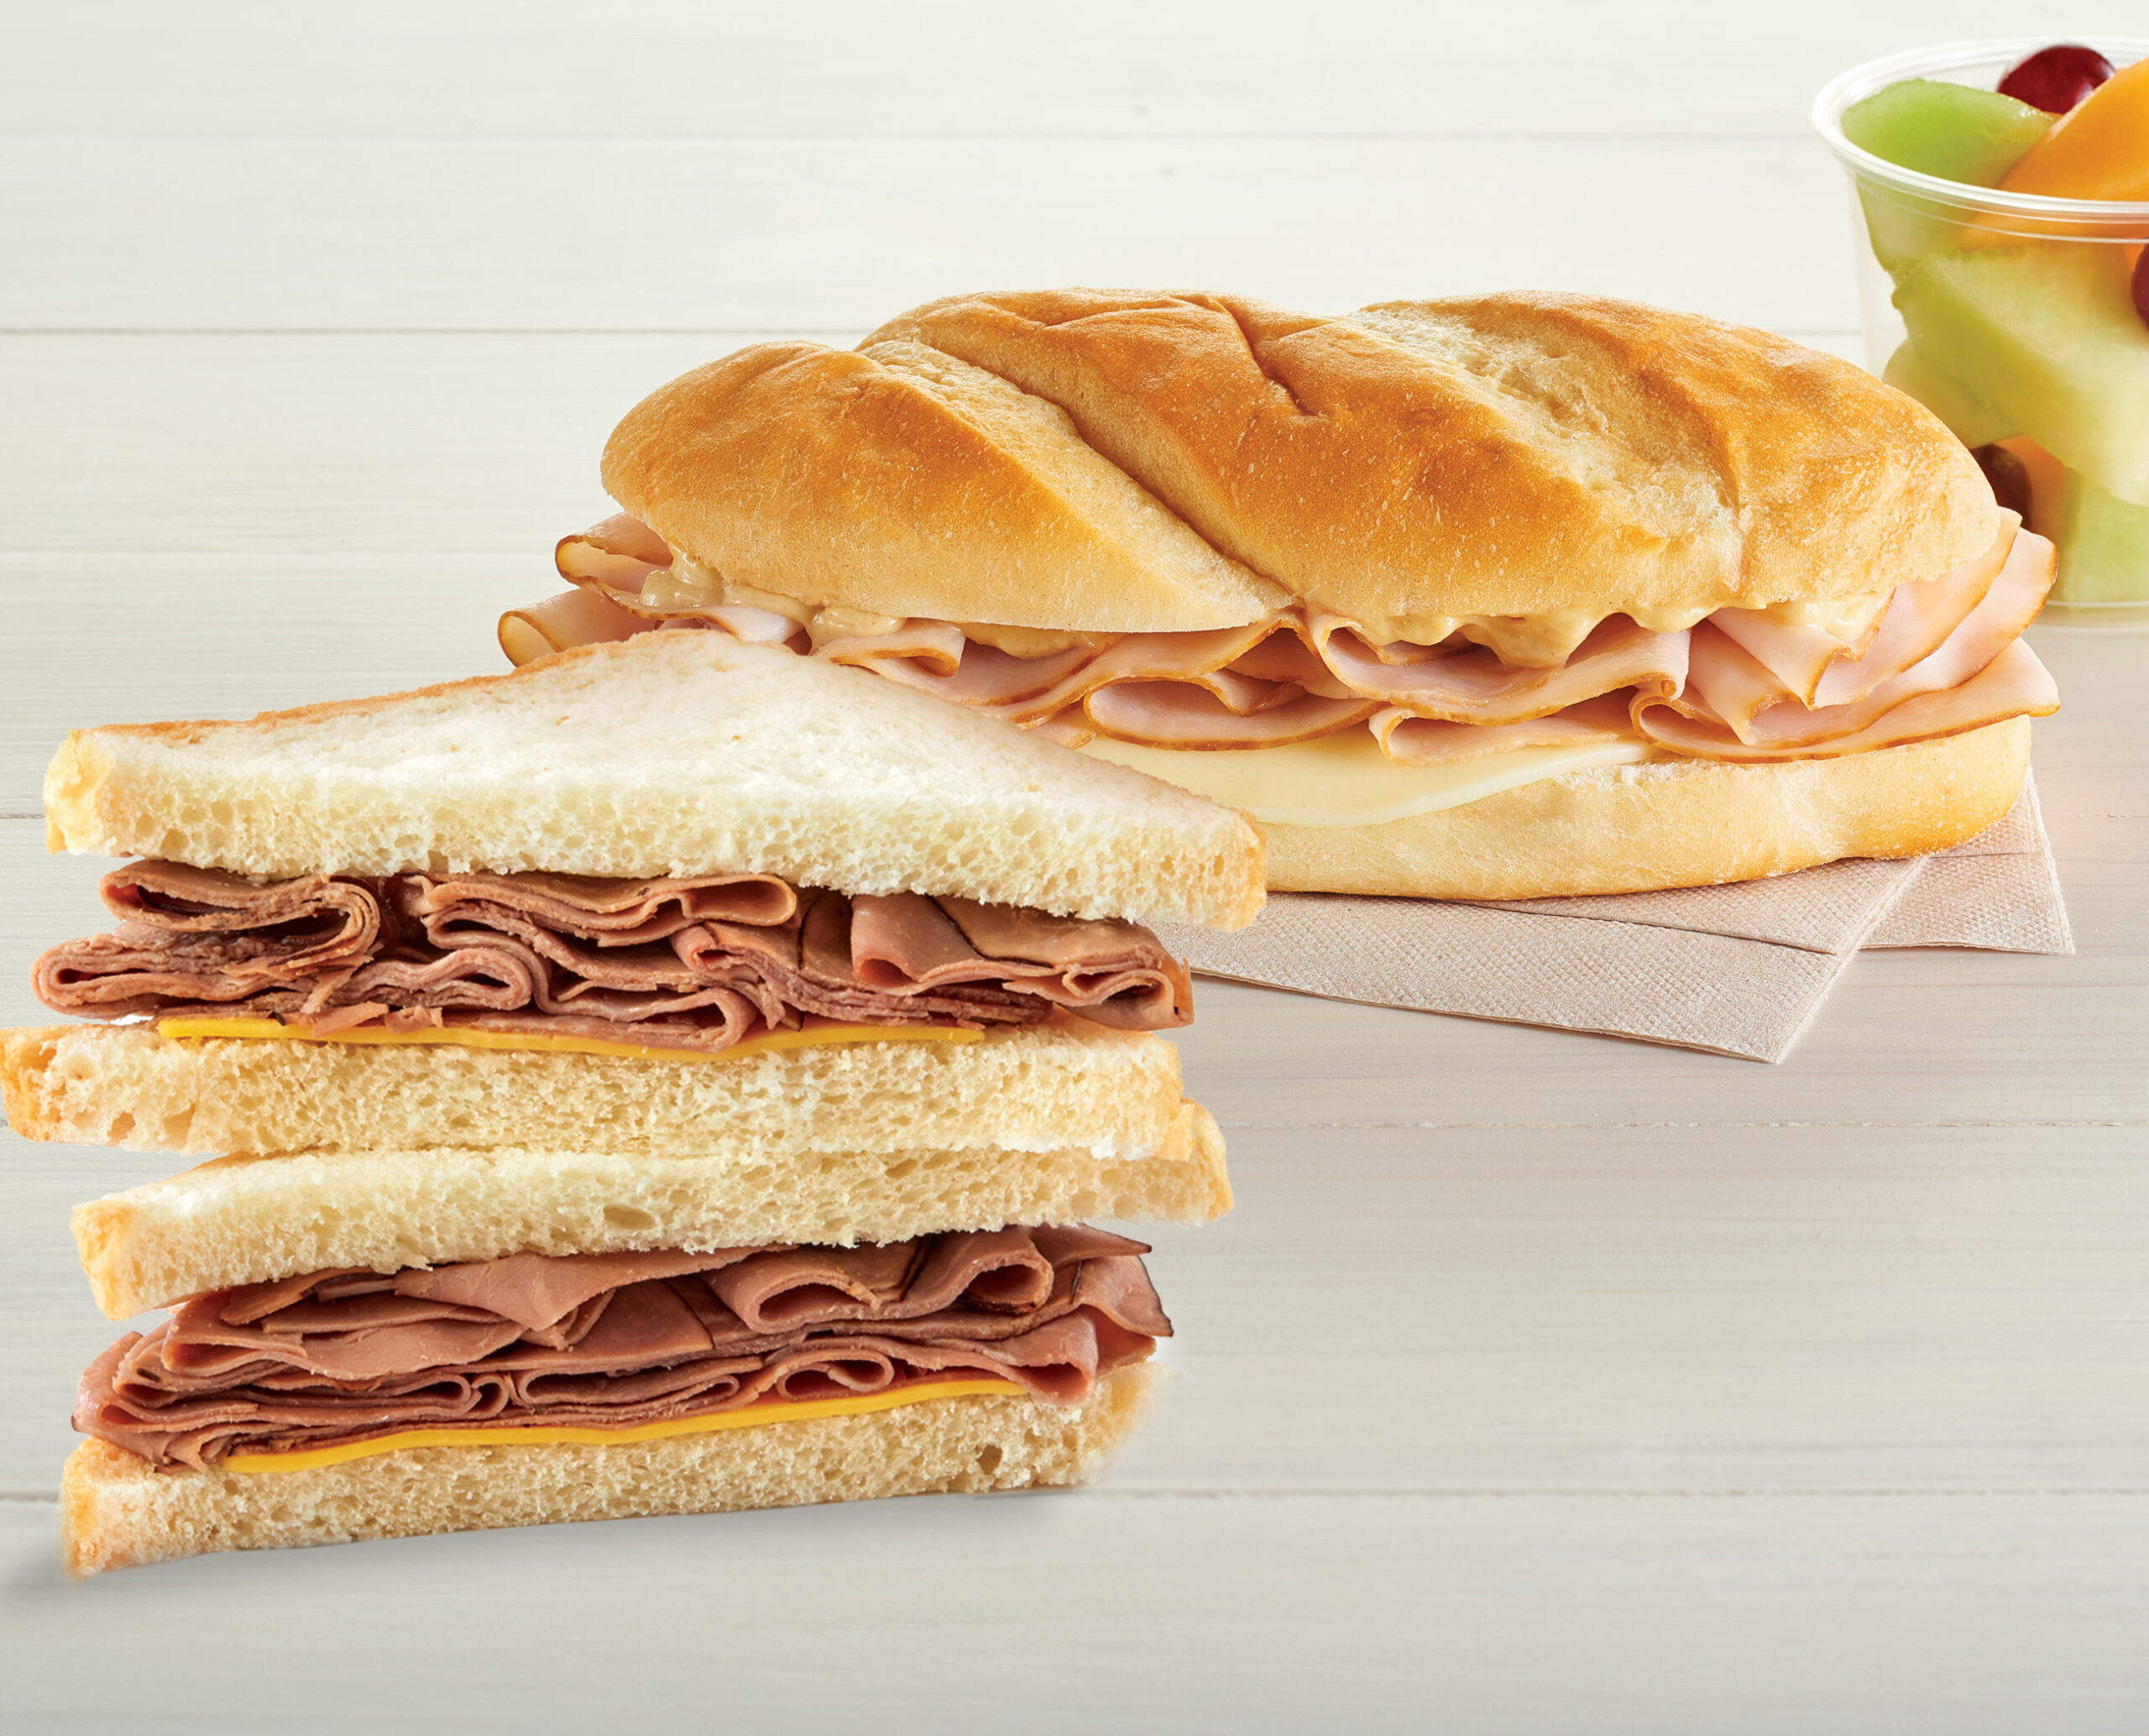 New Deli Express Roast Beef Sandwich and three new Market Sandwich Subs image